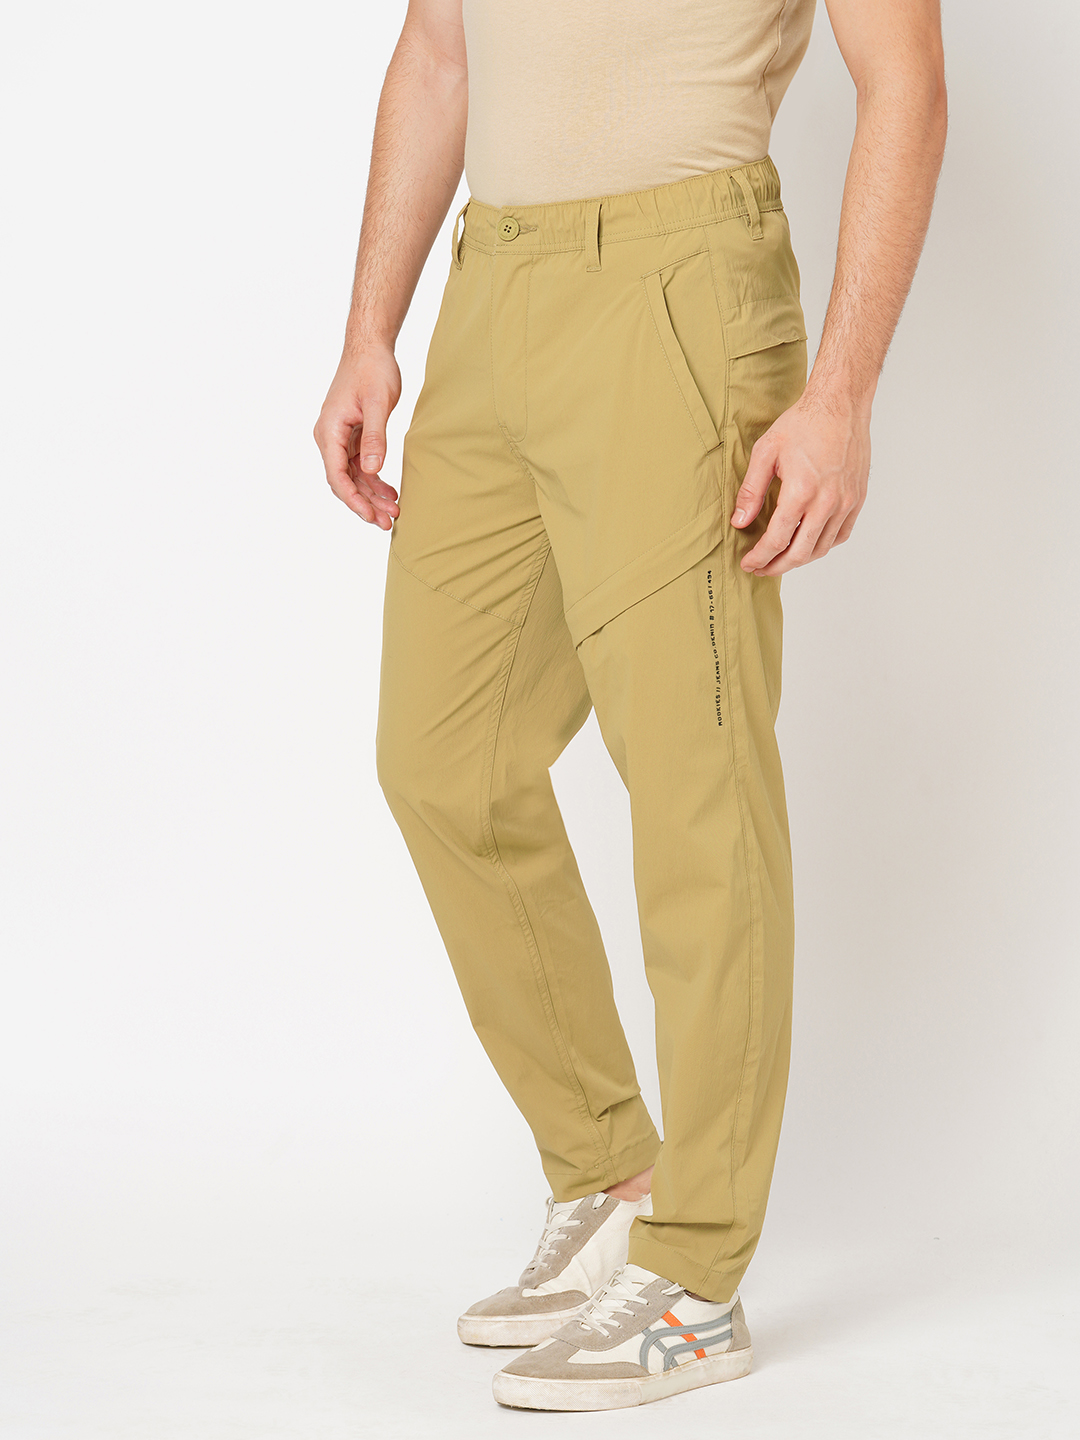 ANTIQUE BRONZE UTILITY PANT (SLIM TAPERED FIT)